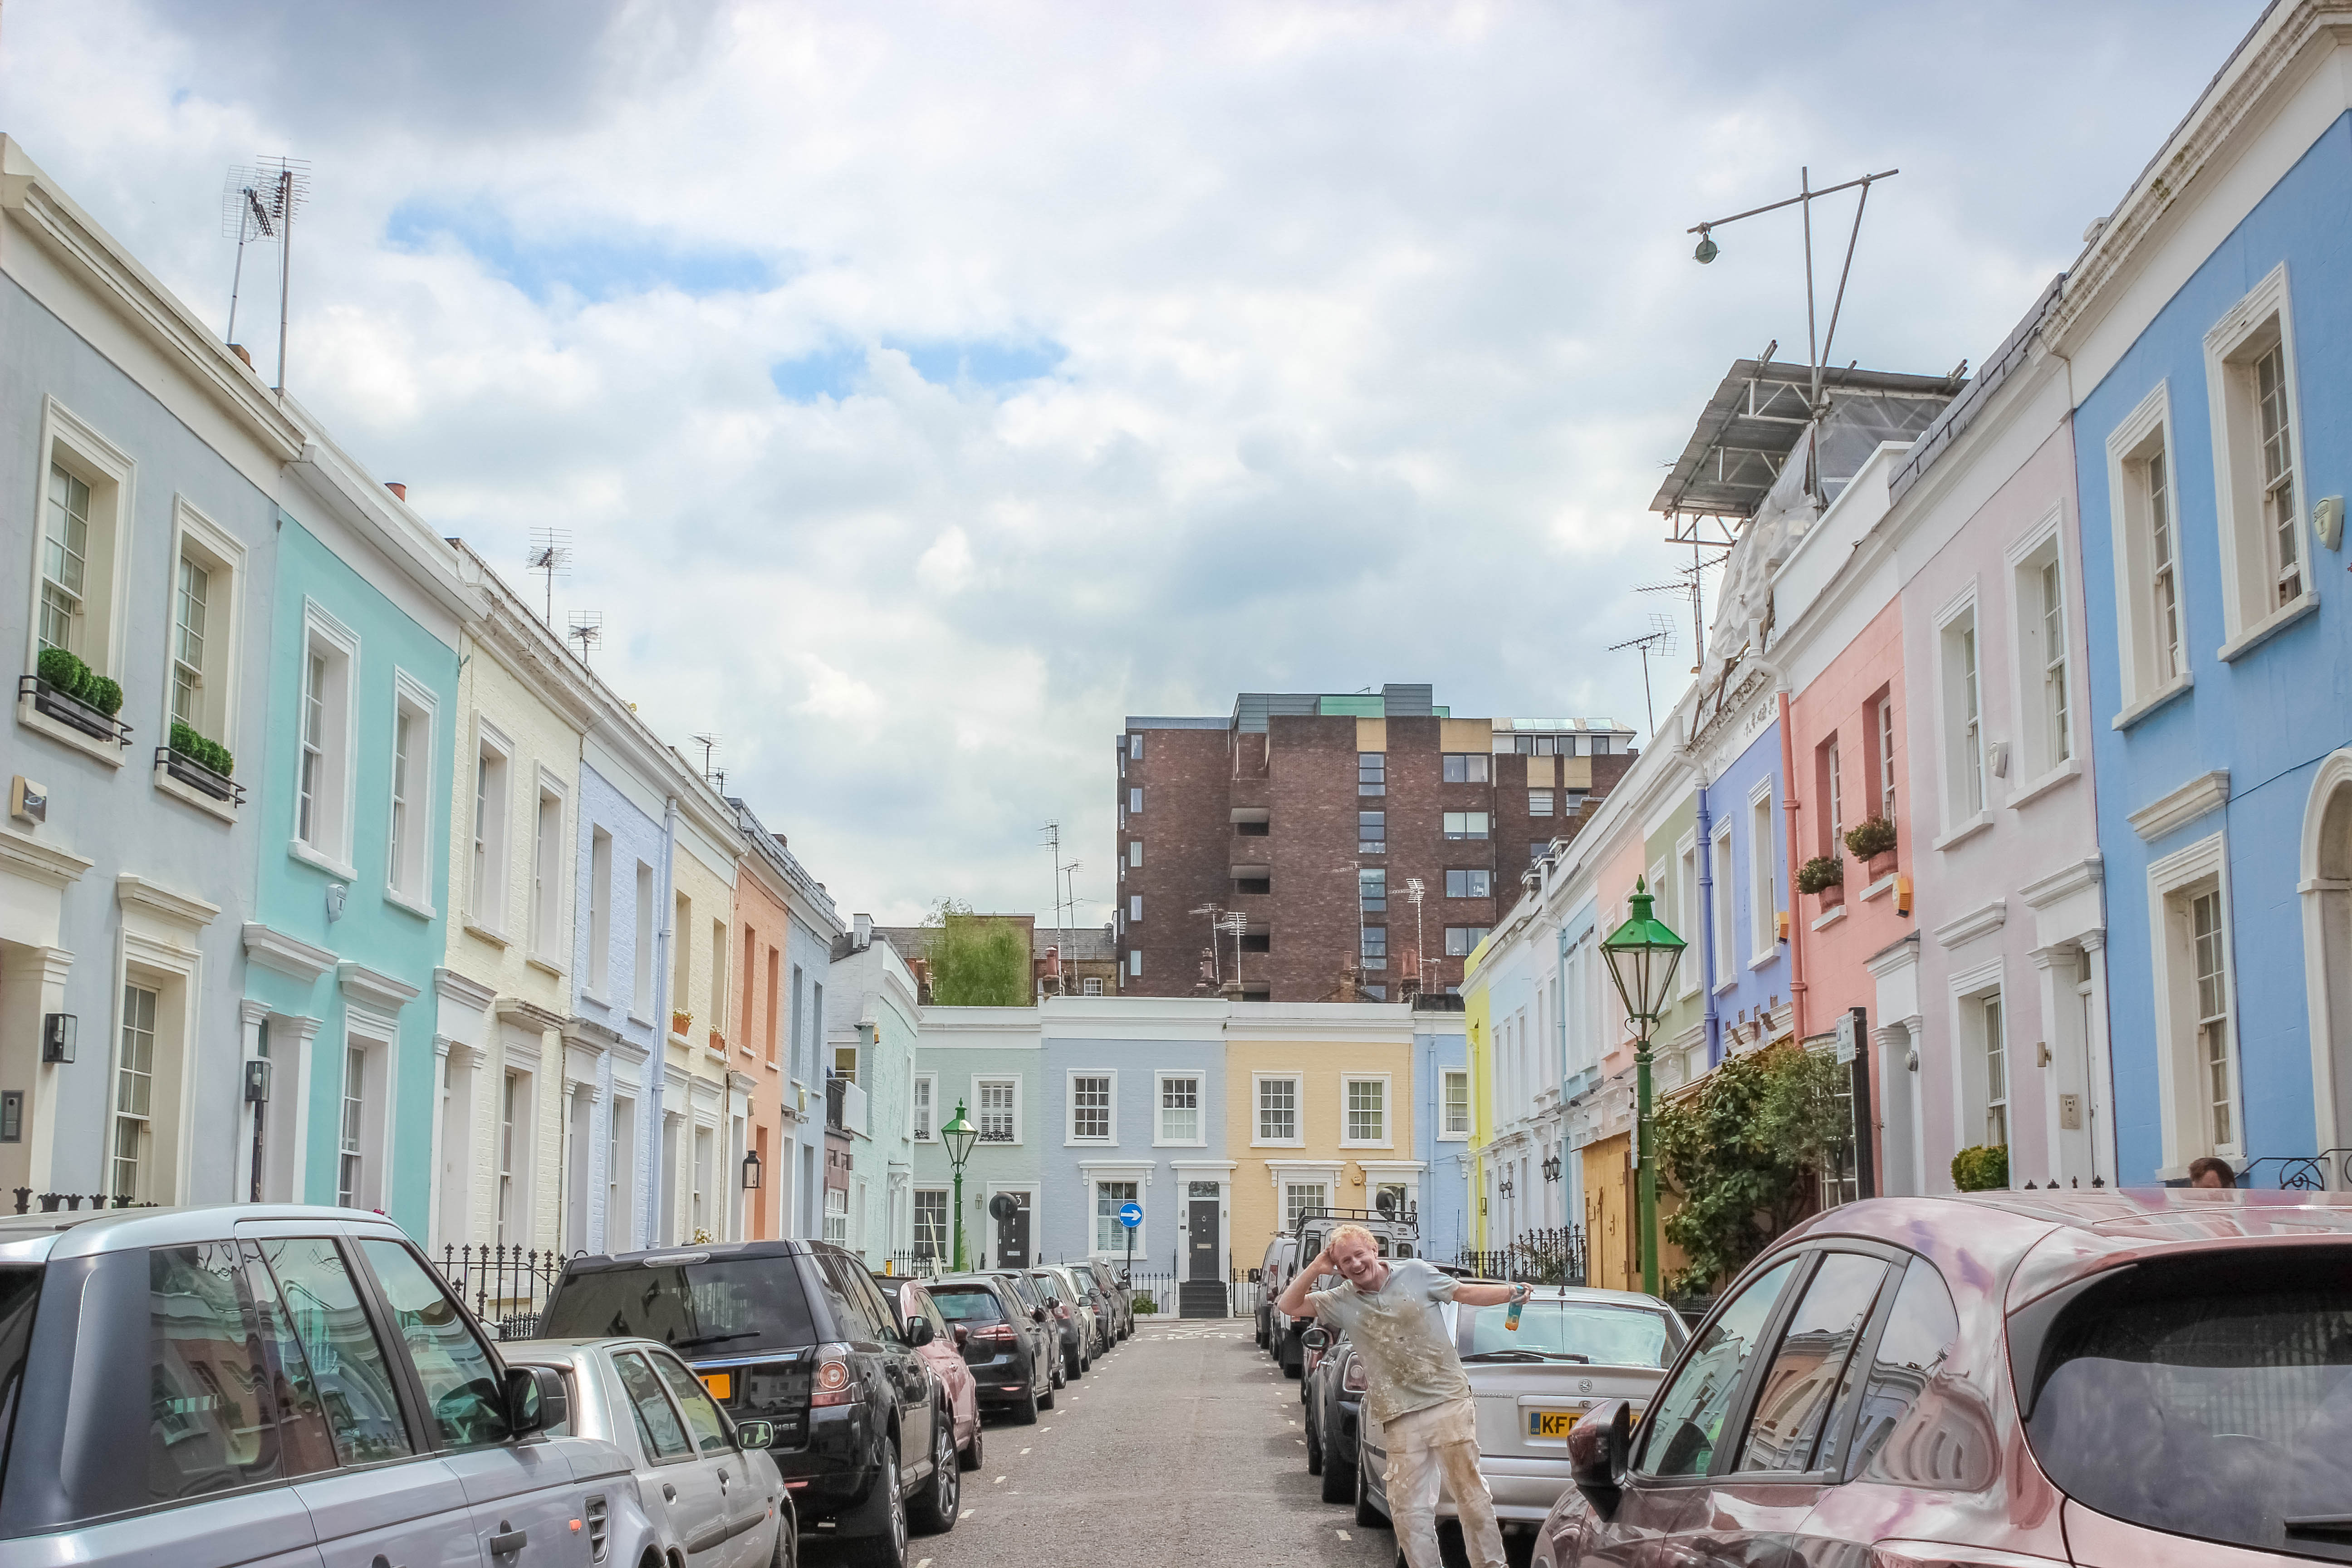 Notting Hill Guide: London's Most Charming Area - Compass + Twine